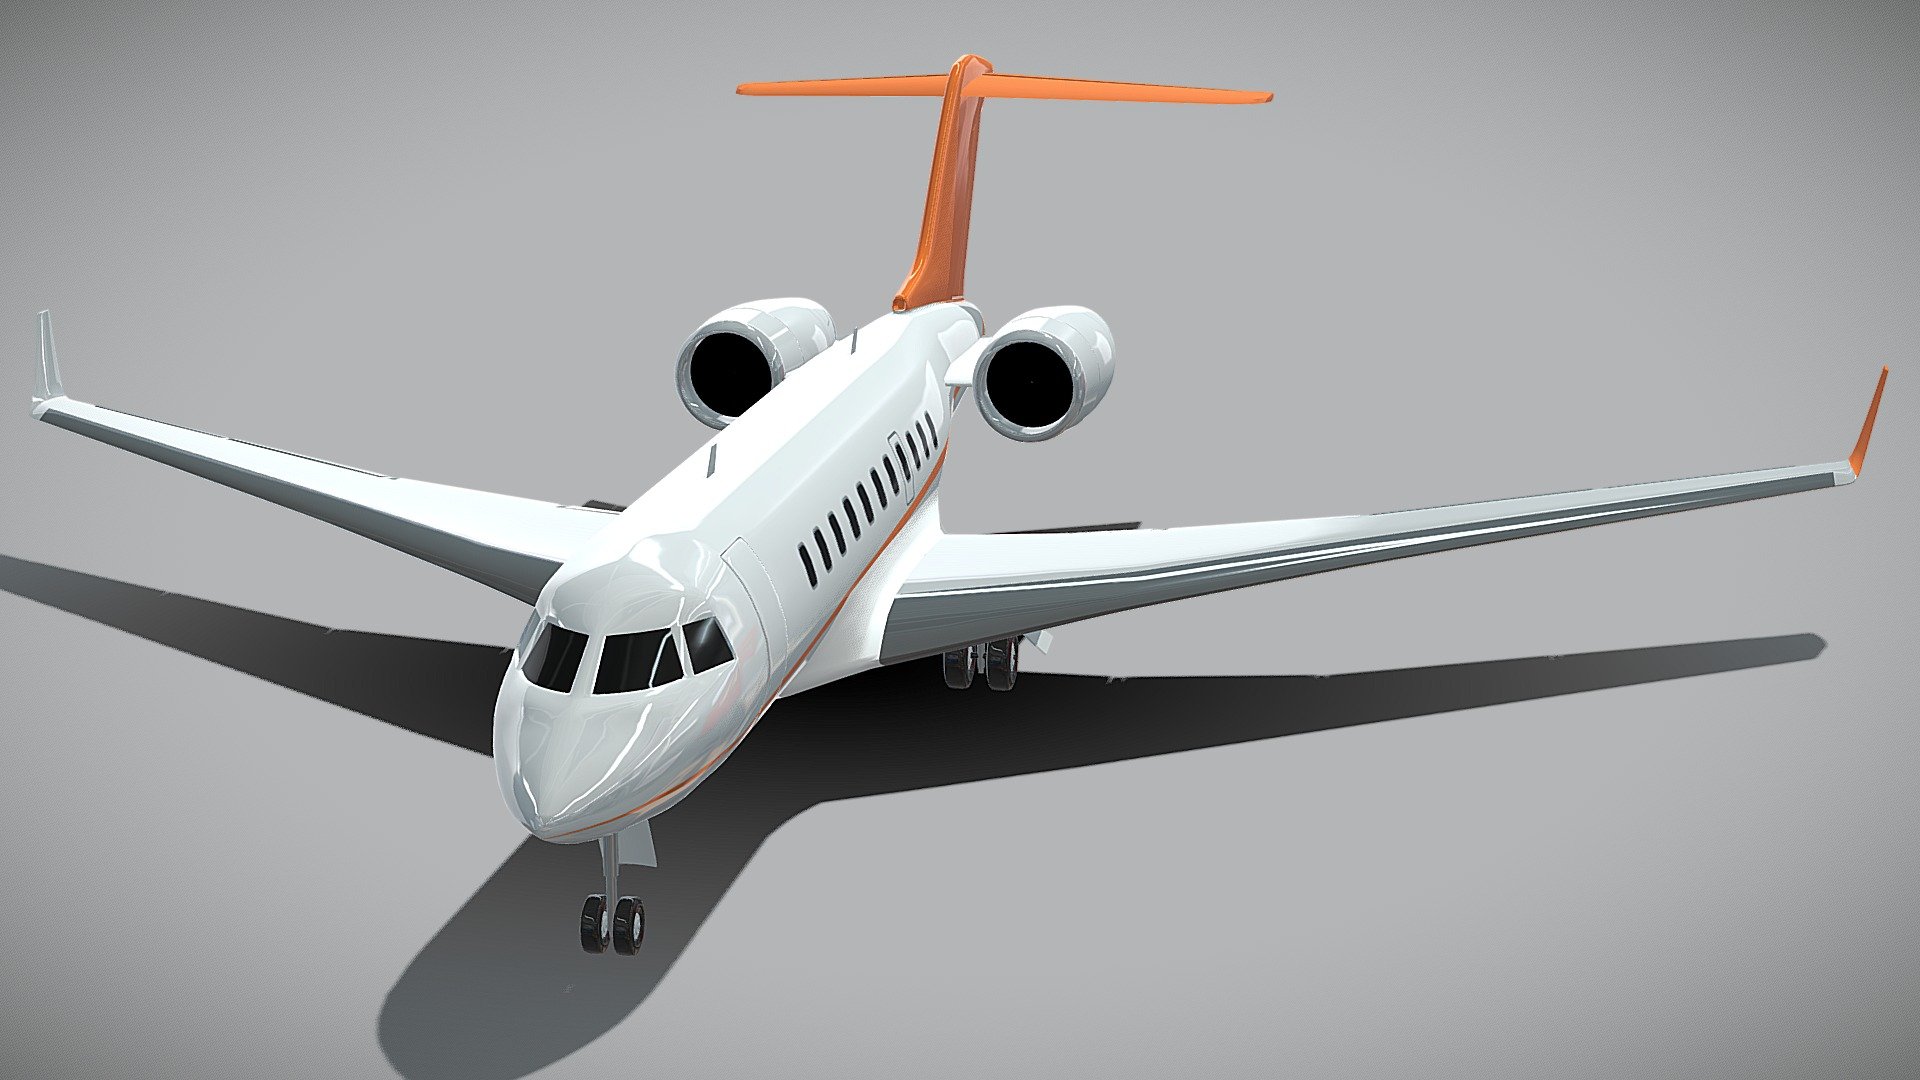 3d Model created with blender3d 2.73 version.There is 2 textures for this product.One for fuselage 2050x2050png with passenger windows and stripe graphic.Second is for engines 1050x1050png file.There are no interior objects for this product.Most of the objects are named by object and by material.This airplane has landing gears,but some of the objects aren't rigged.Model was rendered with subdiv 2,until my product was exported with subdivision 1.There are 4 NGONS.Enjoy my product 3d model